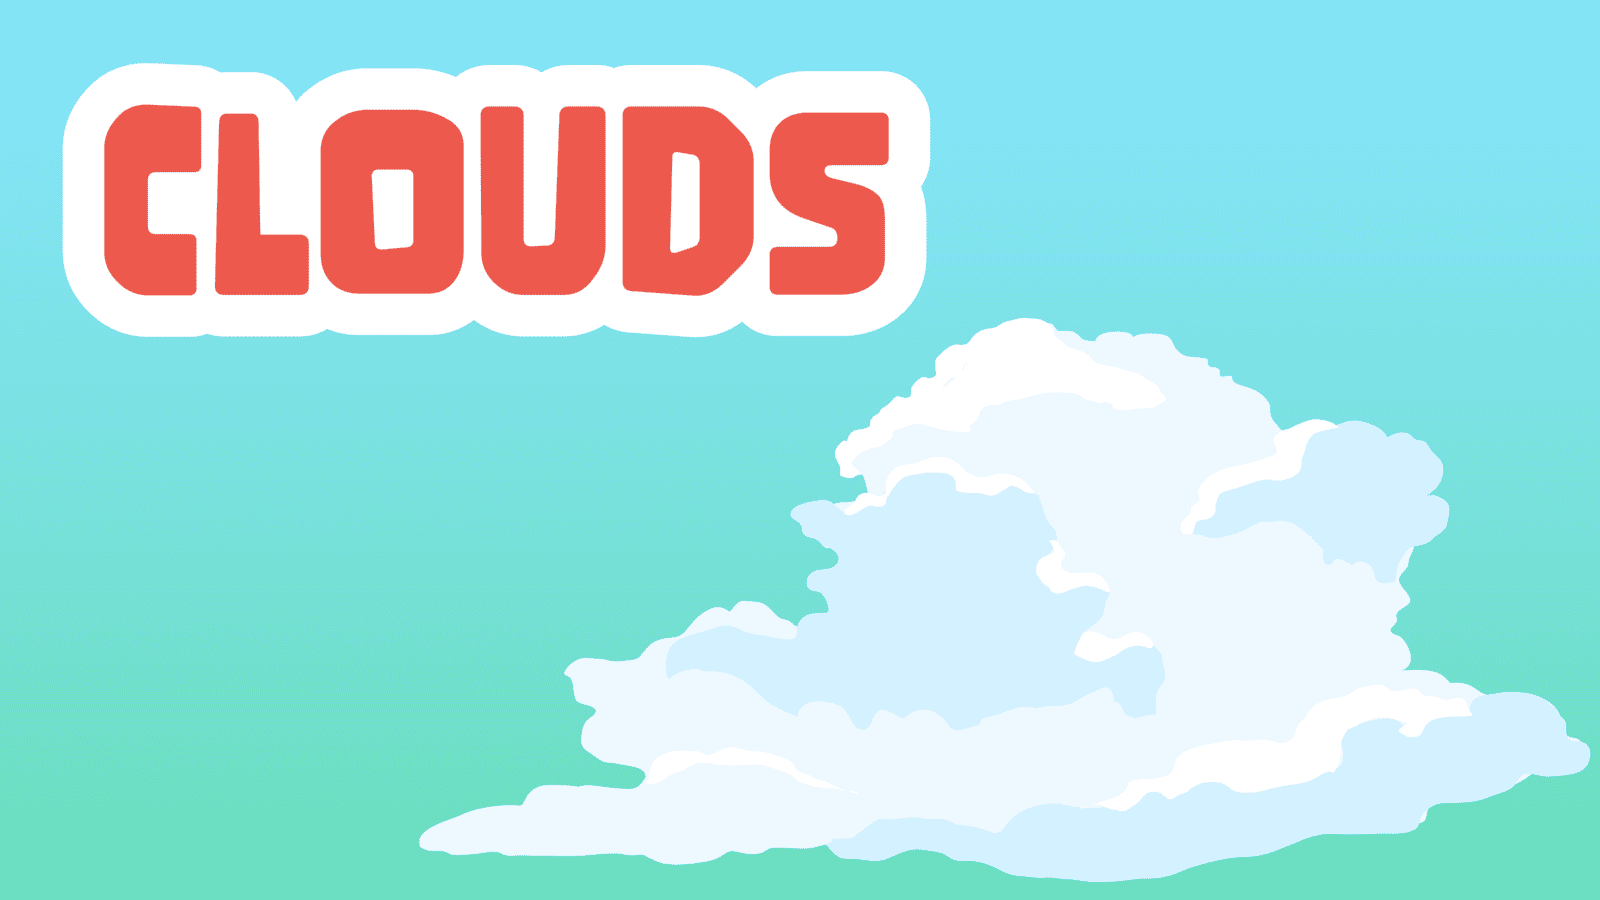 Clouds Facts for Kids – 5 Charming Facts about Clouds